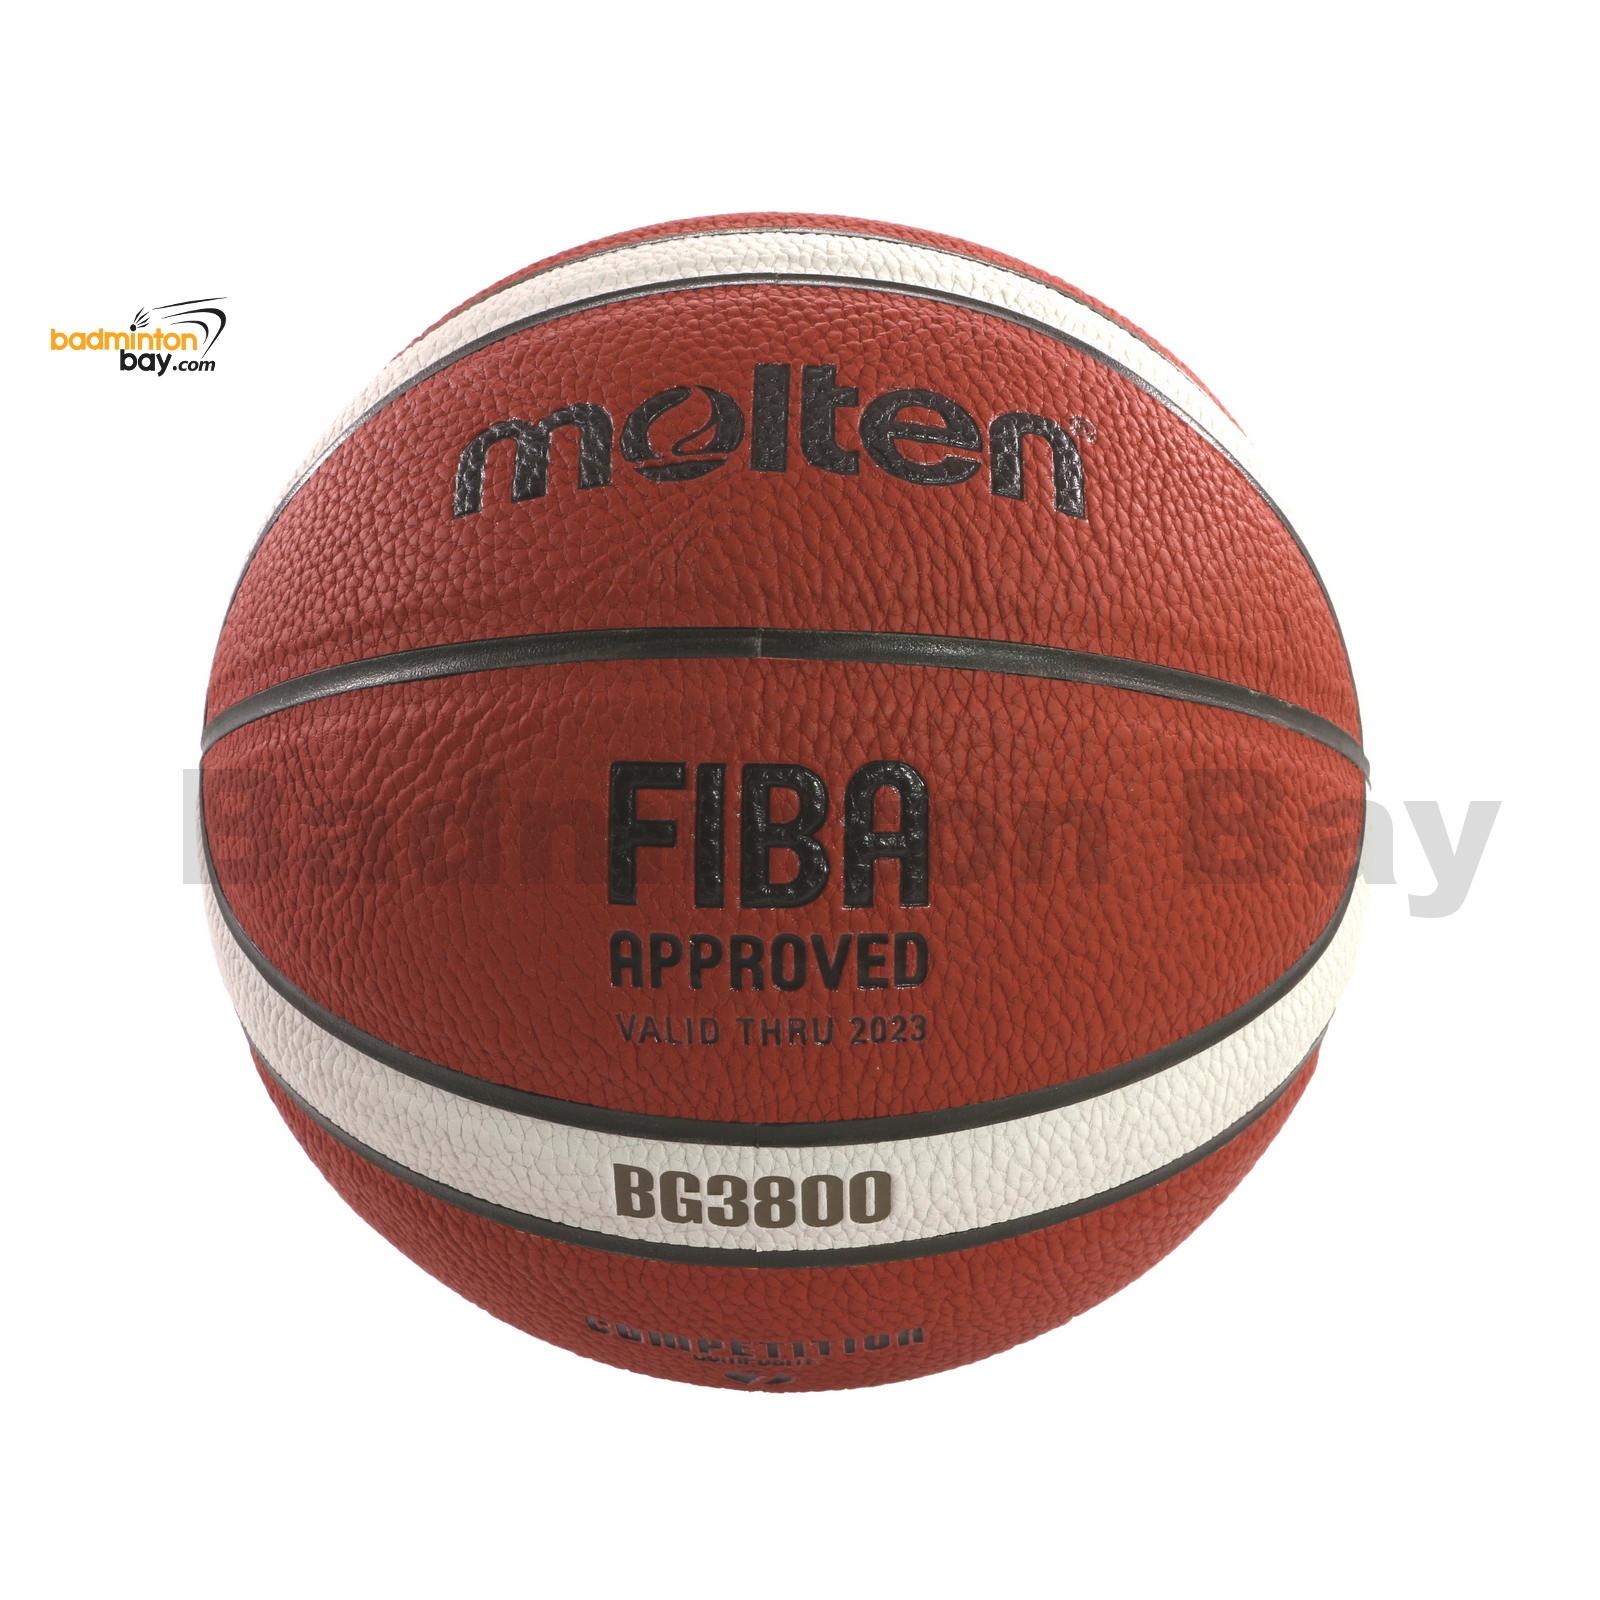 MOLTEN FIBA GG7X  basketball size 7 Free & Fast delivery Black Friday Price!! 